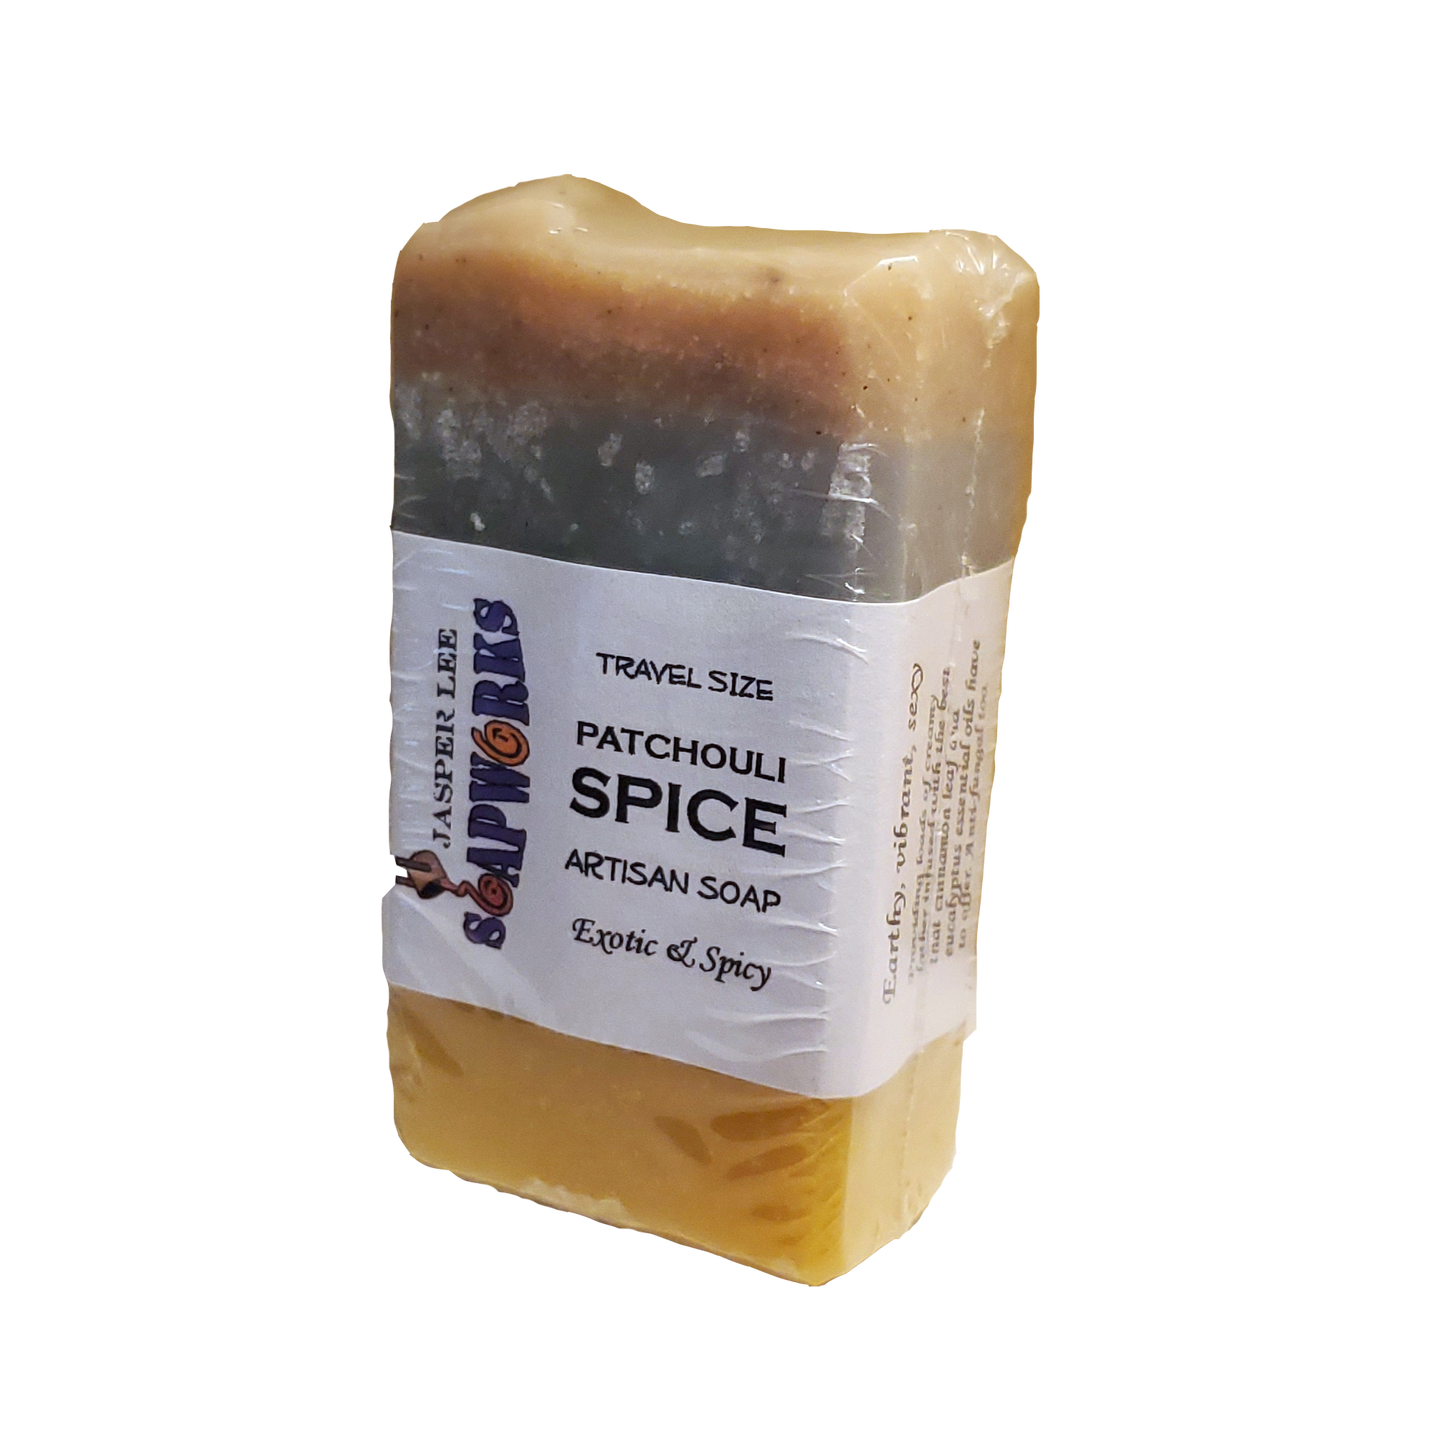 Travel size of multi-colored patchouli spice soap bar